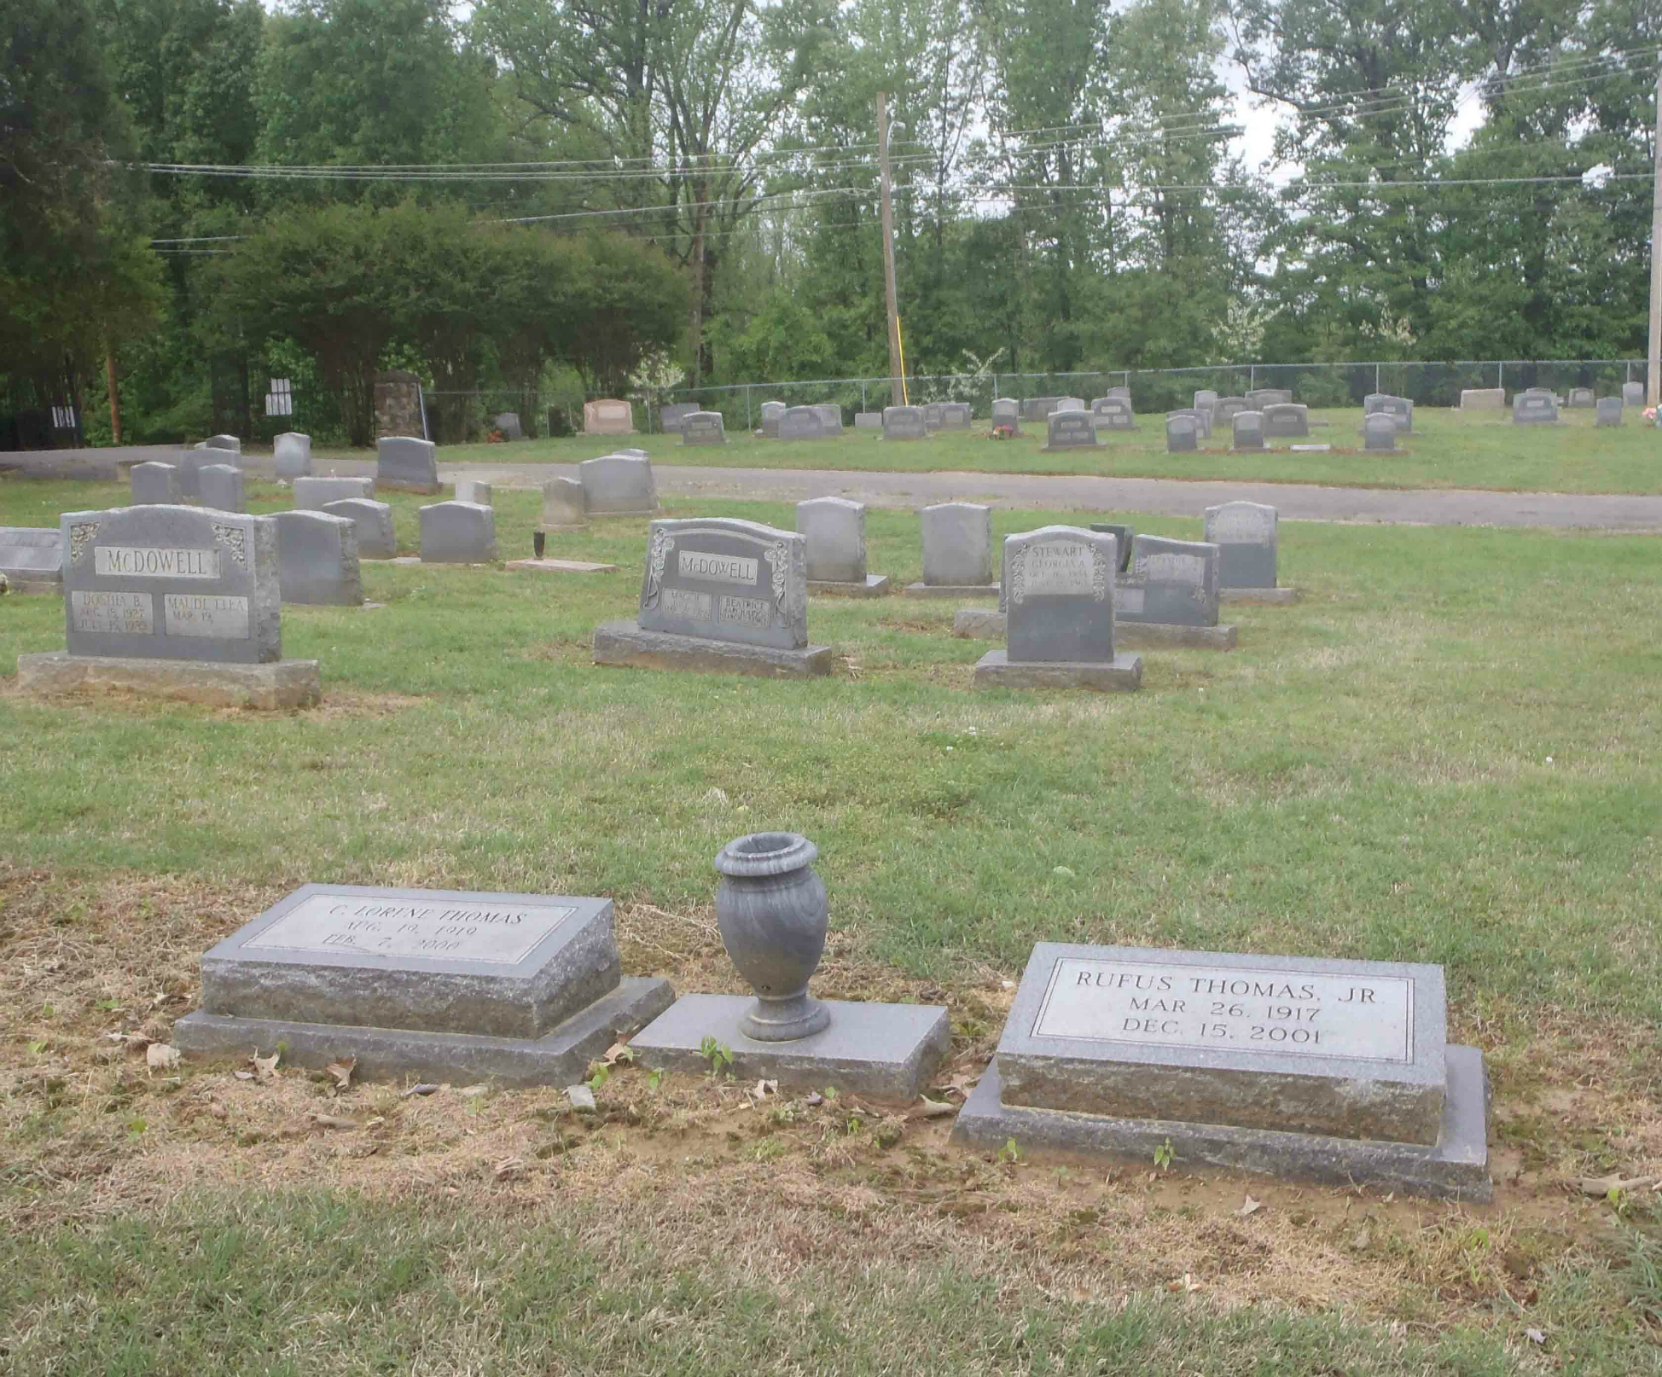 The grave of Rufus Thomas Jr. (1917-2001) and his wife C. Lorene Thomas (1919-2000), New Park Cemetery, Memphis, Tennessee